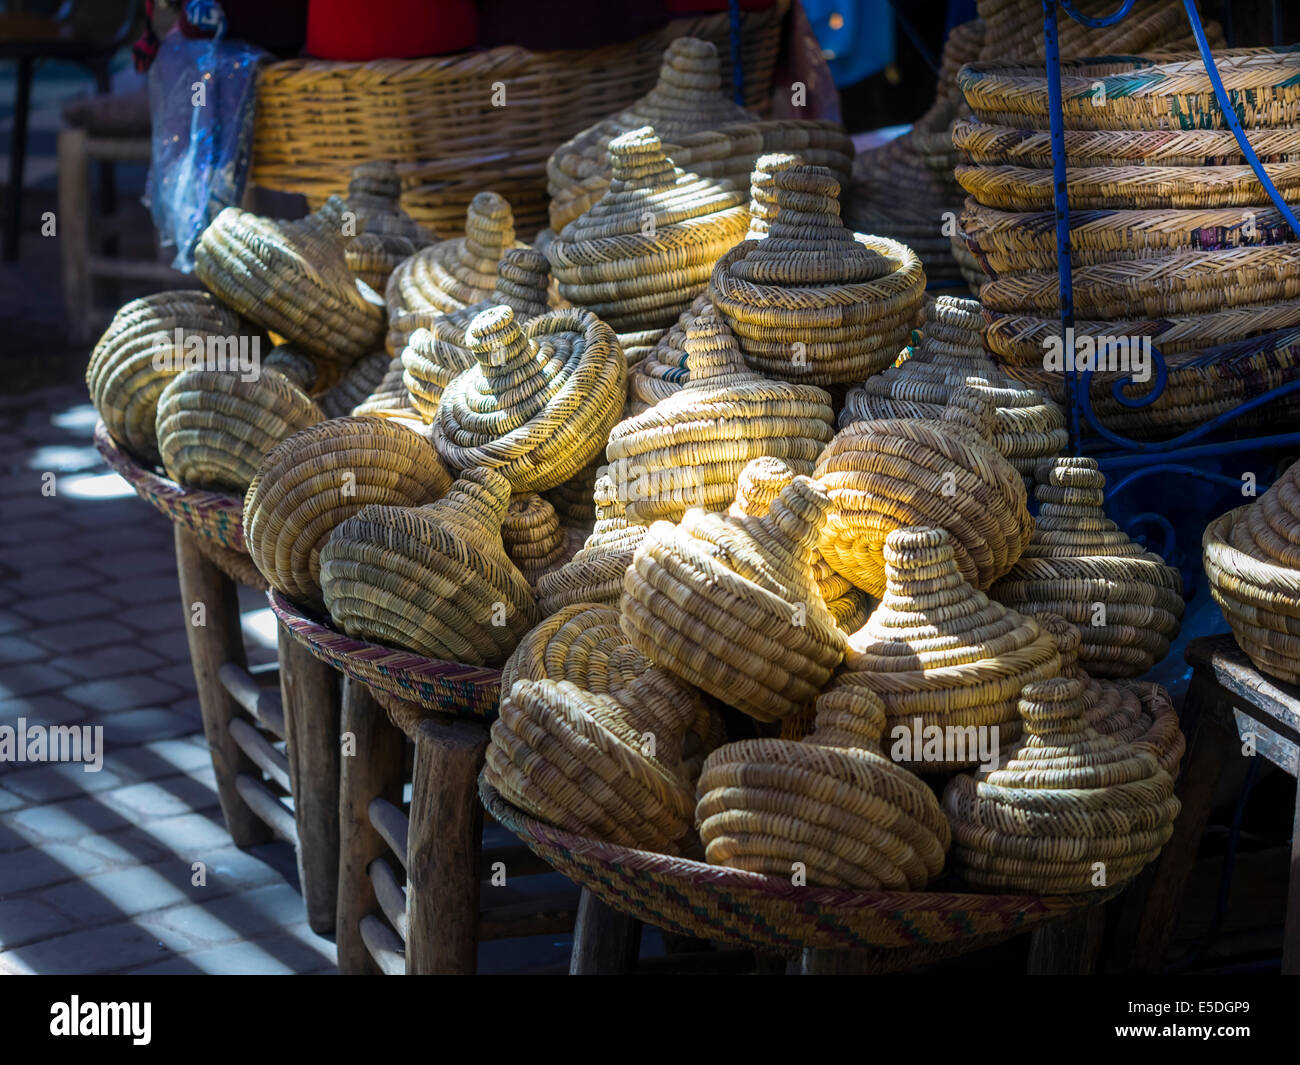 Morocco, Marrakech, Baskets at the souq Stock Photo